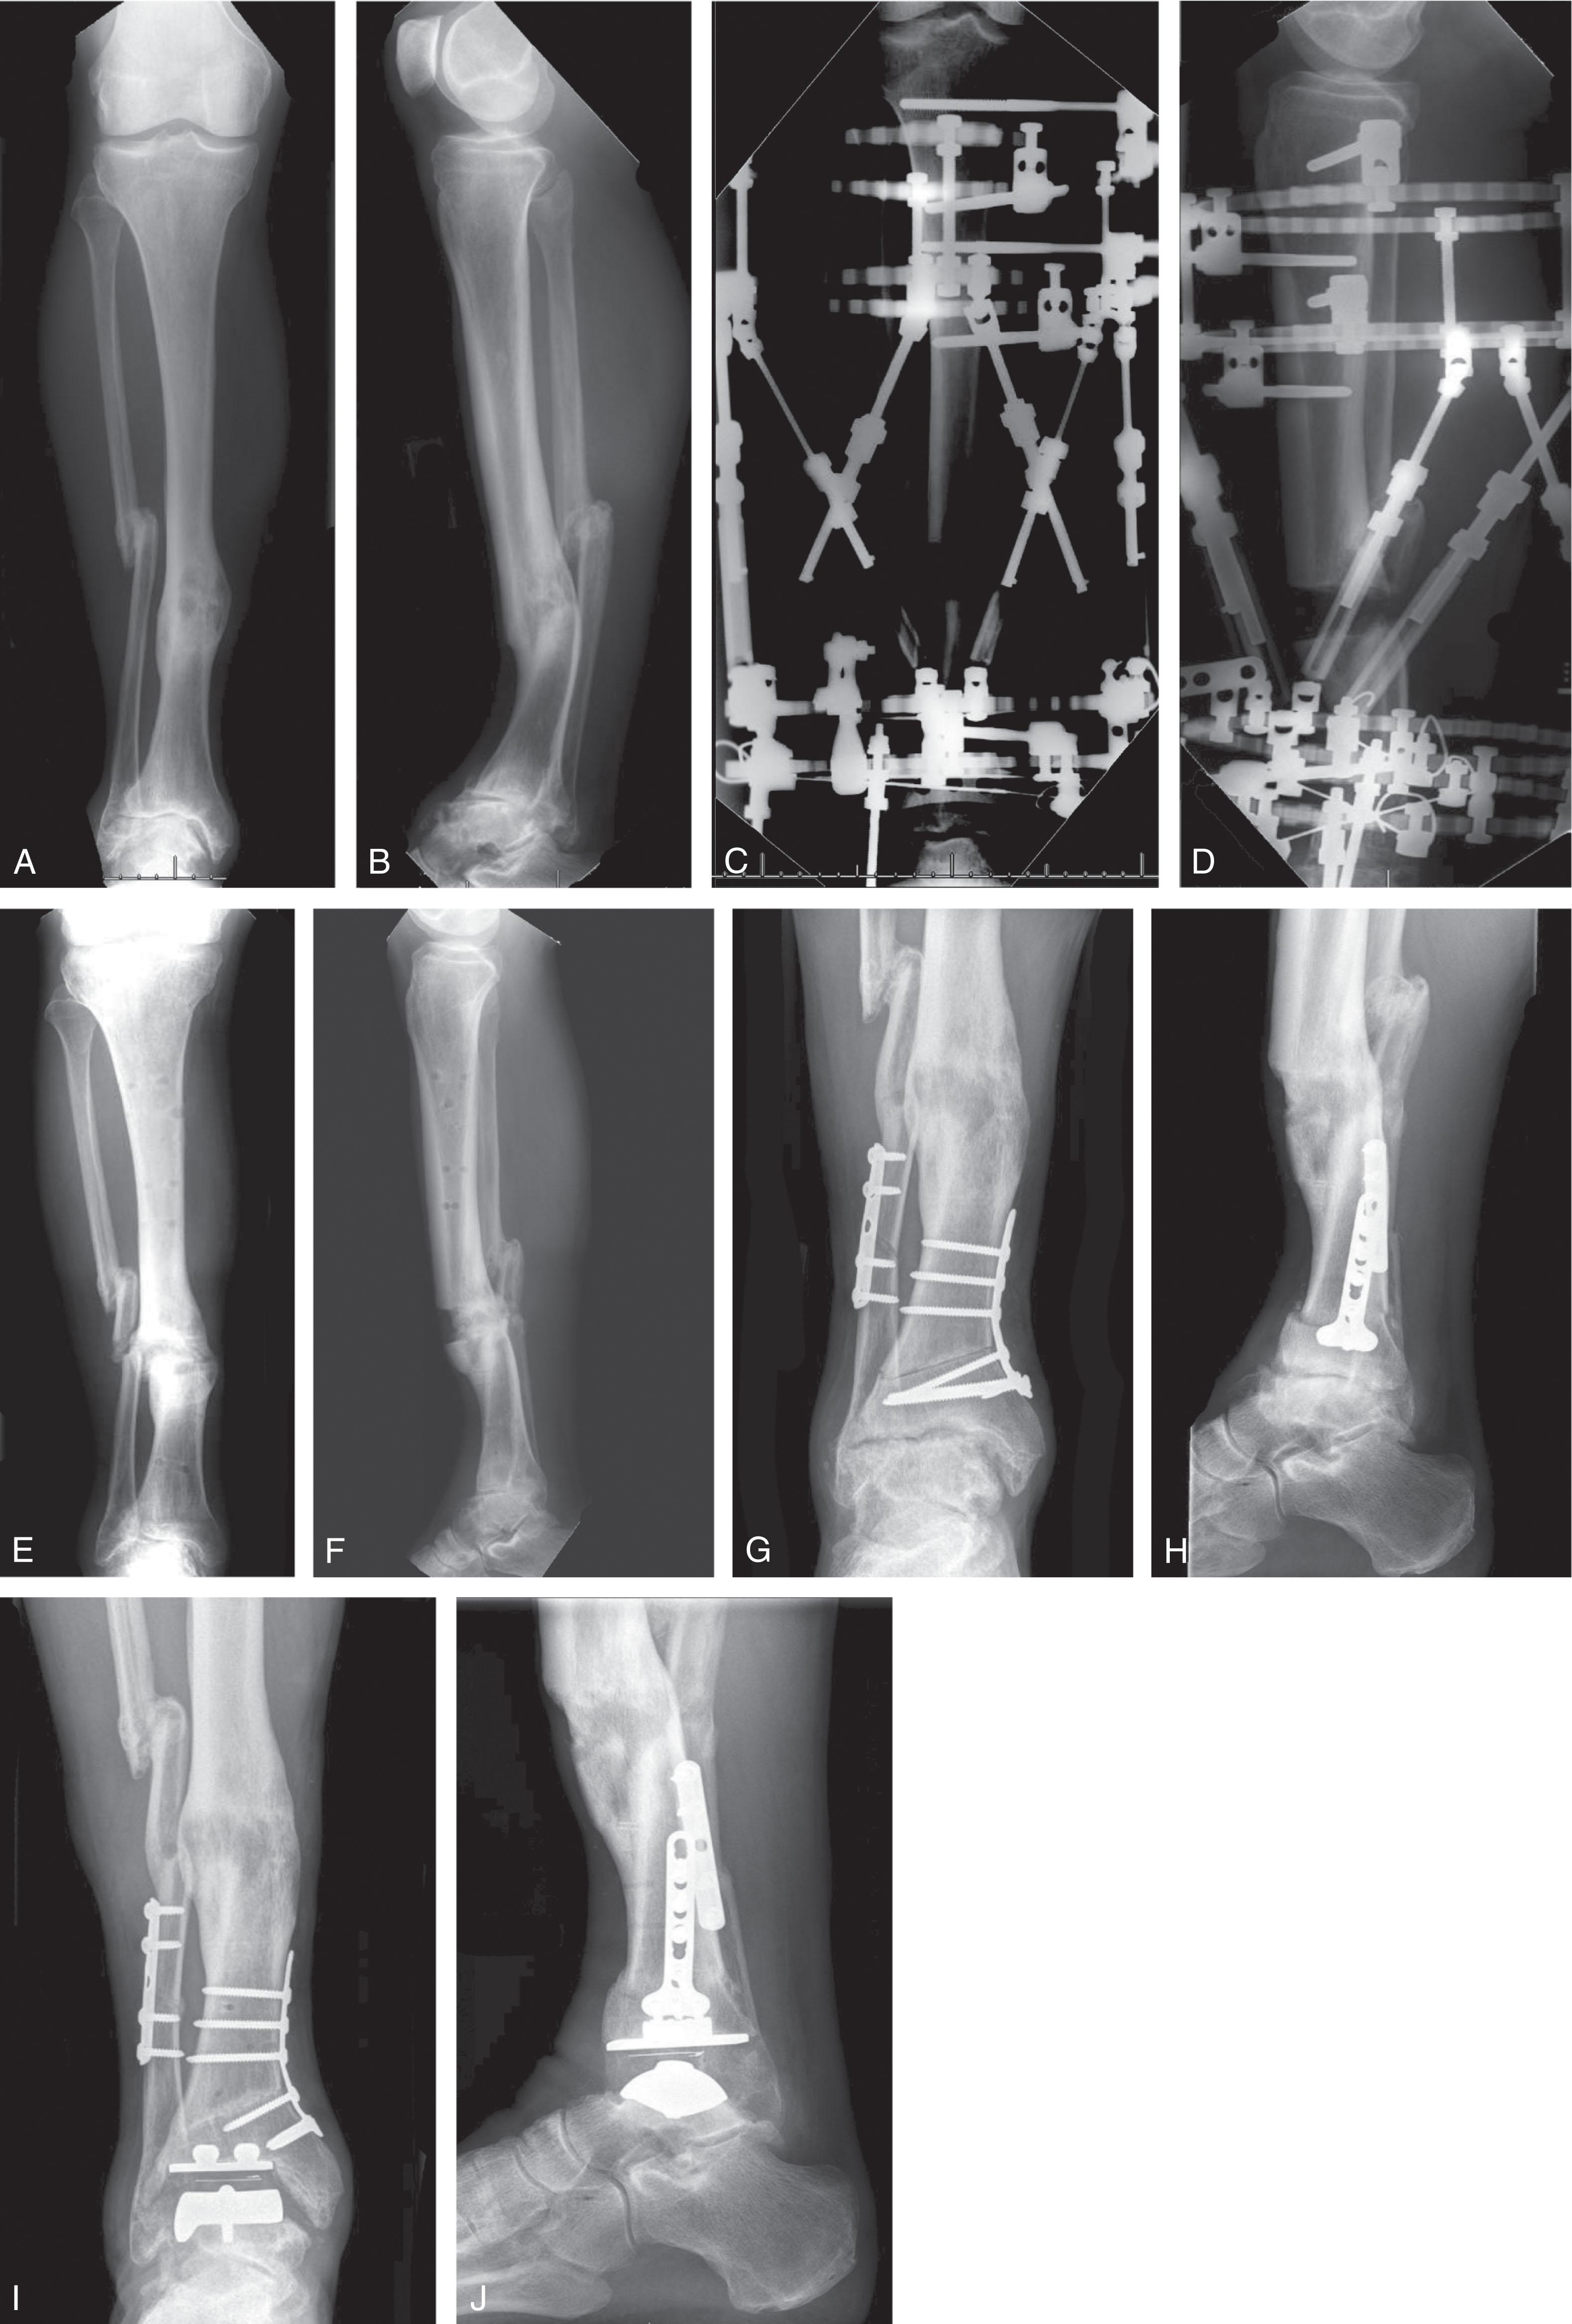 Fig. 23-13, Managing tibial deformity before total ankle replacement. A and B , Anteroposterior and lateral radiographs of the tibia showing posttraumatic ankle arthritis and tibial shaft malunion including apex posterior angular deformity. C and D , A ringed external fixator has been applied and gradual correction performed through distraction osteogenesis. E and F , After fixator removal, the regenerate drifted into valgus as it healed. Mild posterior translation was accepted. G and H , A medial closing wedge supramalleolar osteotomy was performed to improve the ankle coronal plane alignment. I and J , With the improved tibial alignment, a total ankle was implanted using standard techniques and without requiring additional bony or soft tissue balancing procedures.